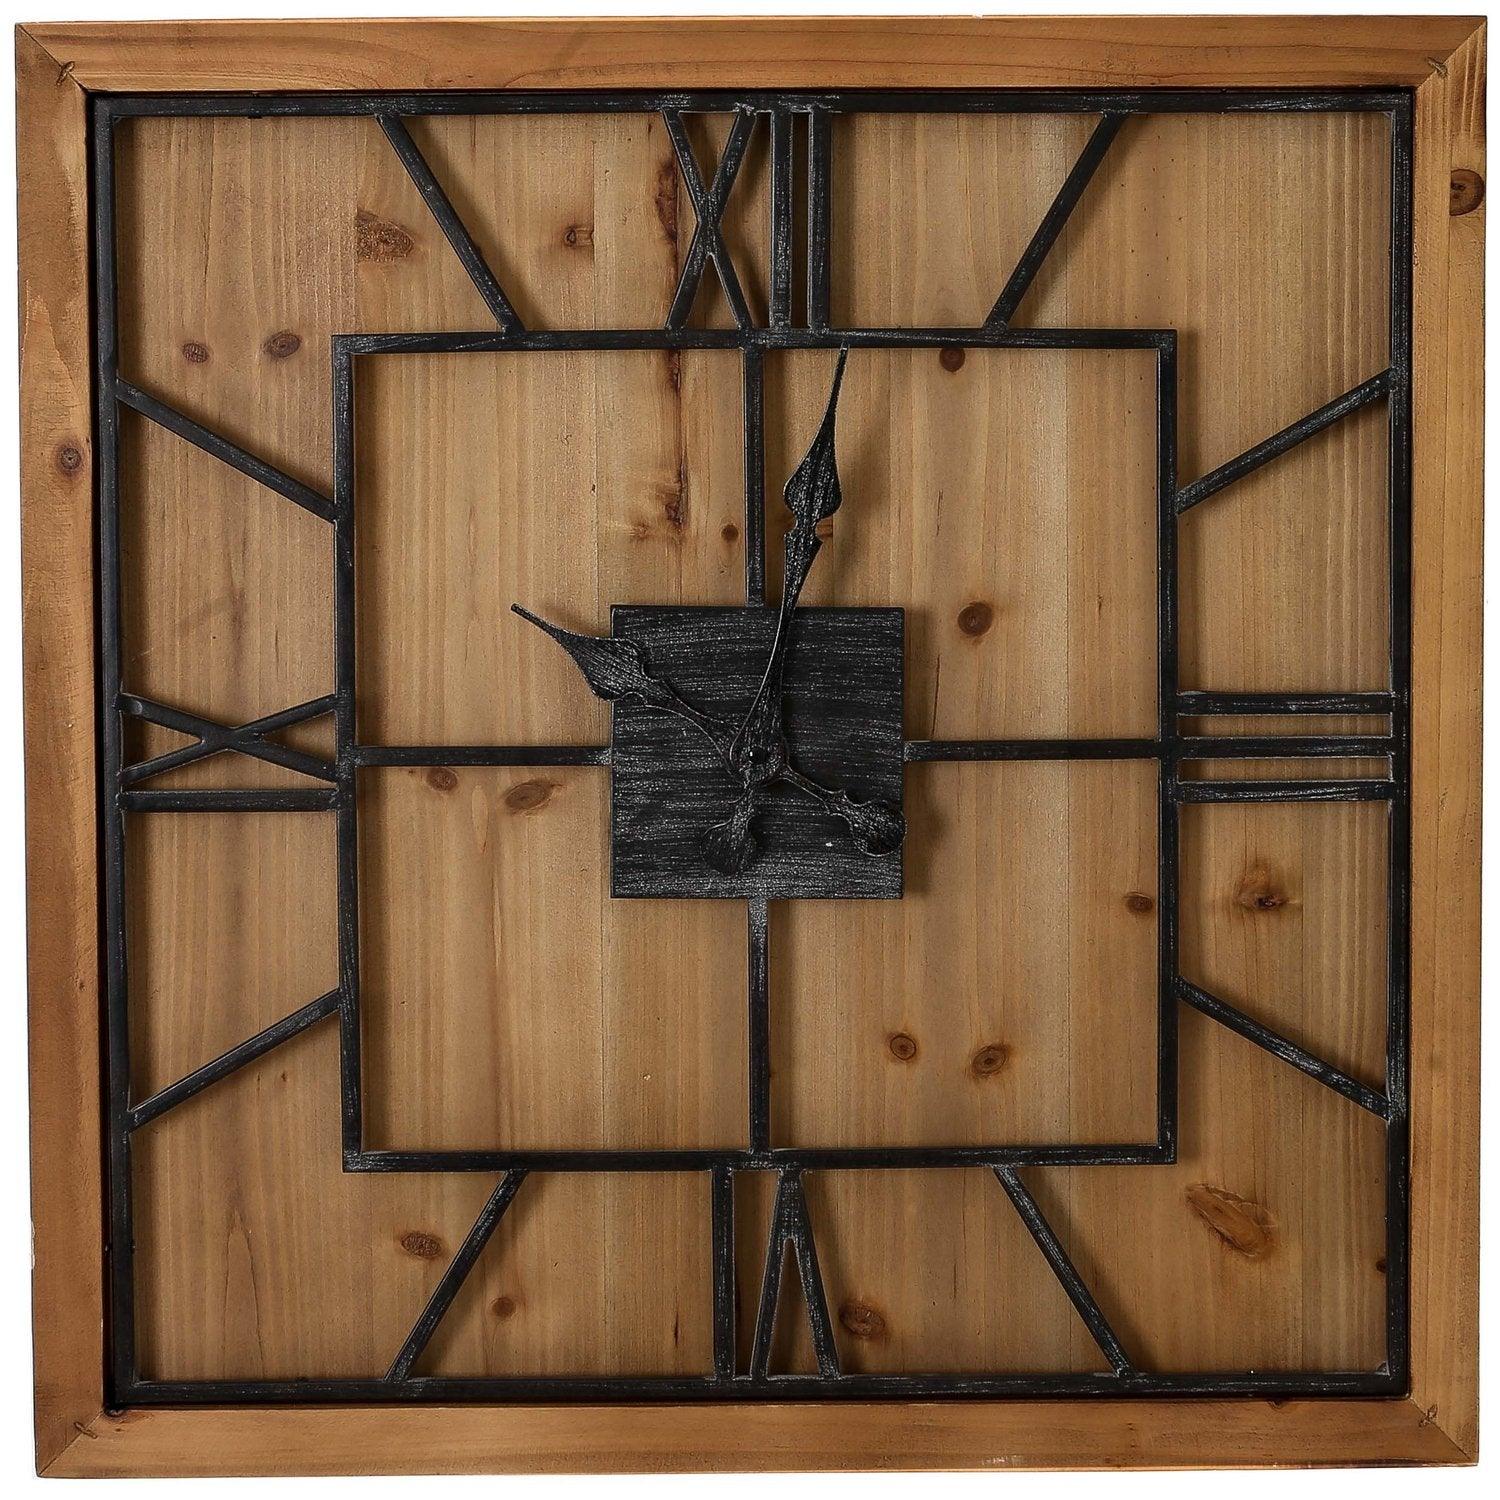 Williston Square Large Wooden Wall Clock - Vookoo Lifestyle